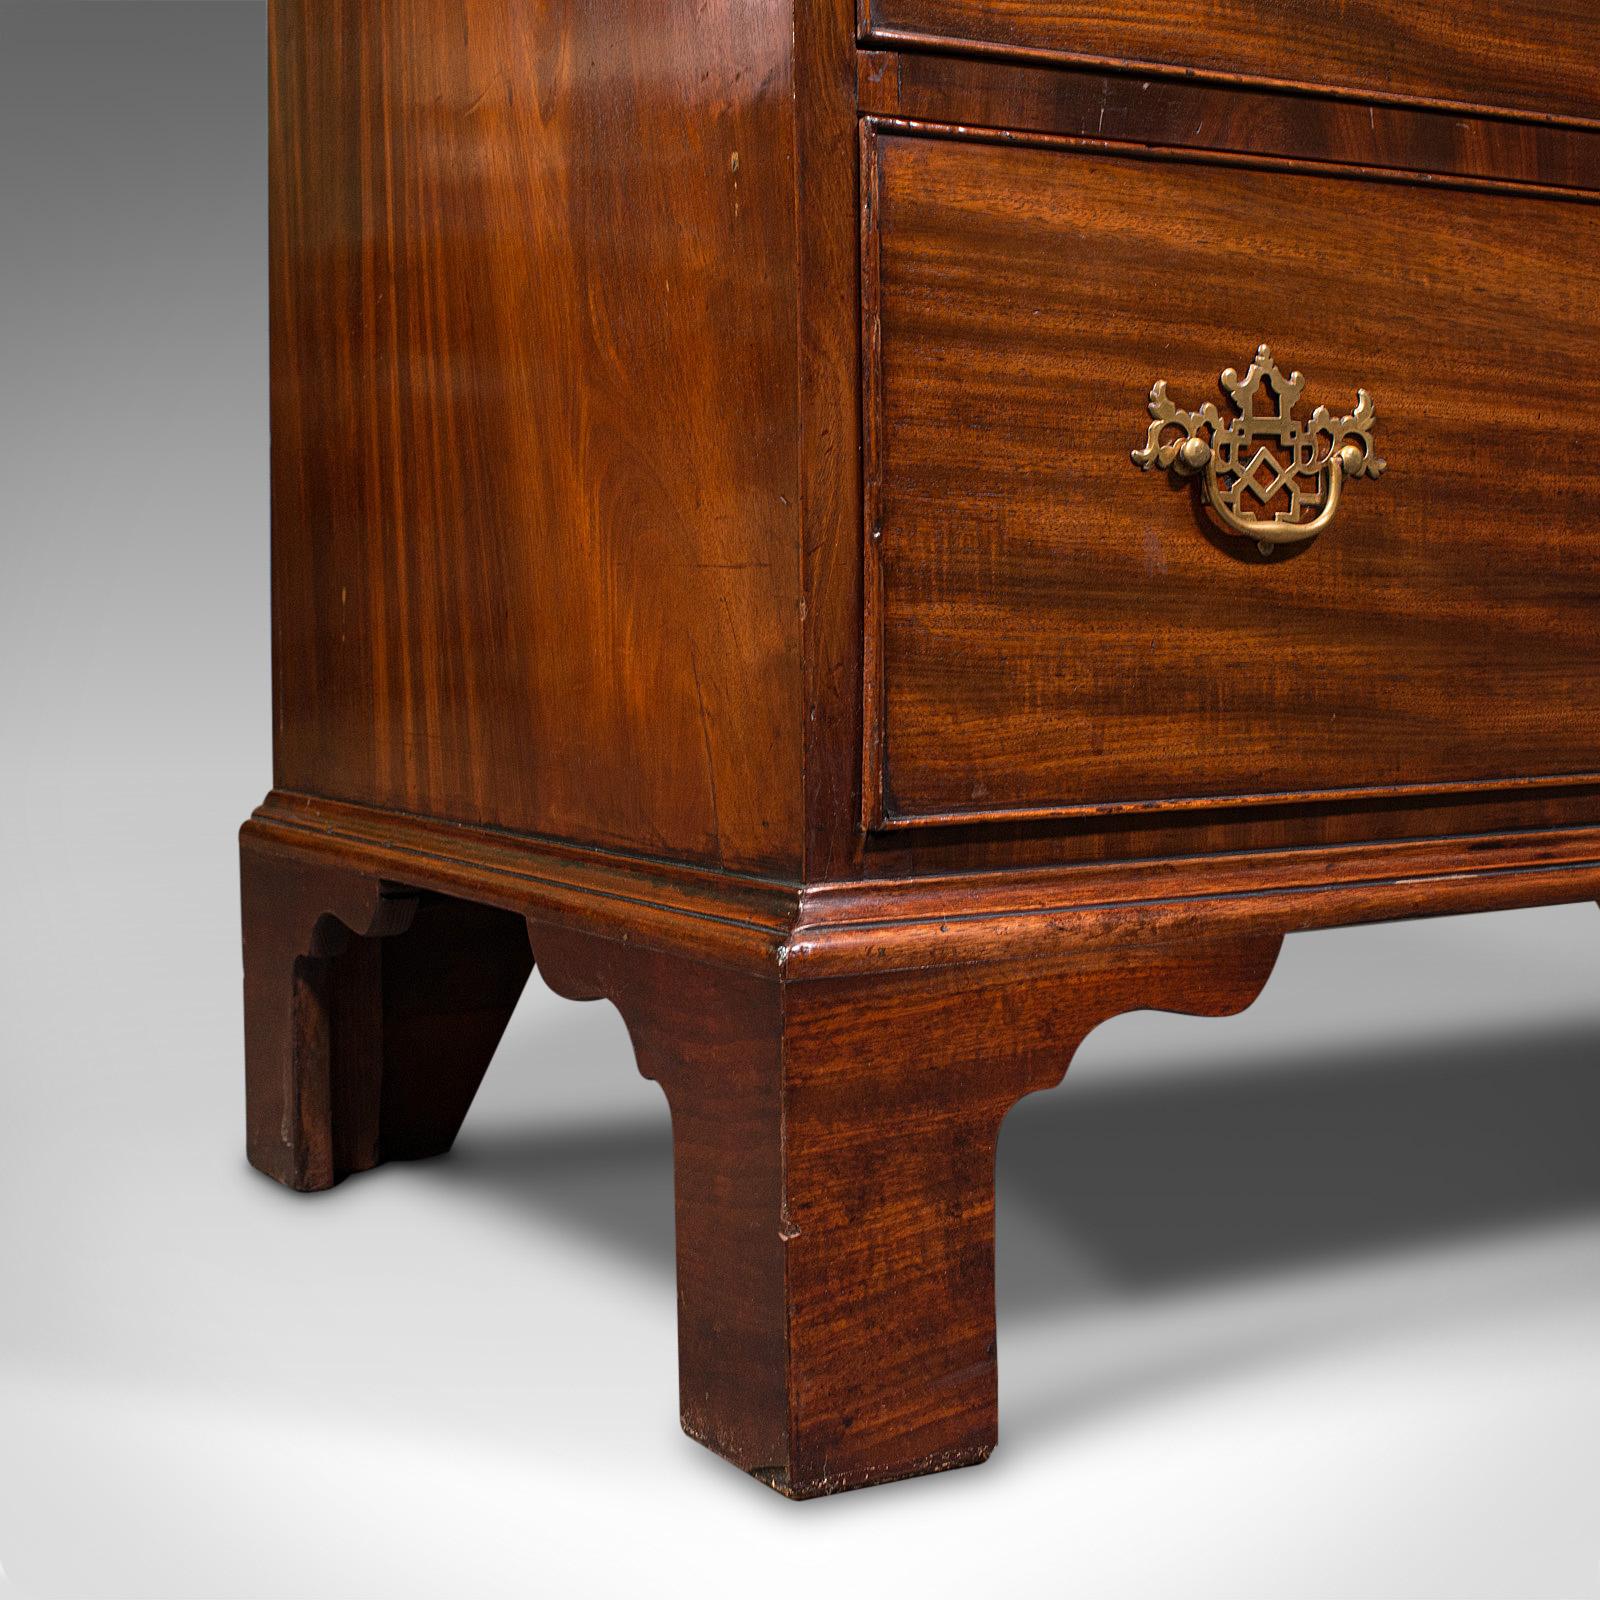 Antique Gentleman's Chest of Drawers, English, Mahogany, Bedroom, Georgian, 1800 For Sale 4